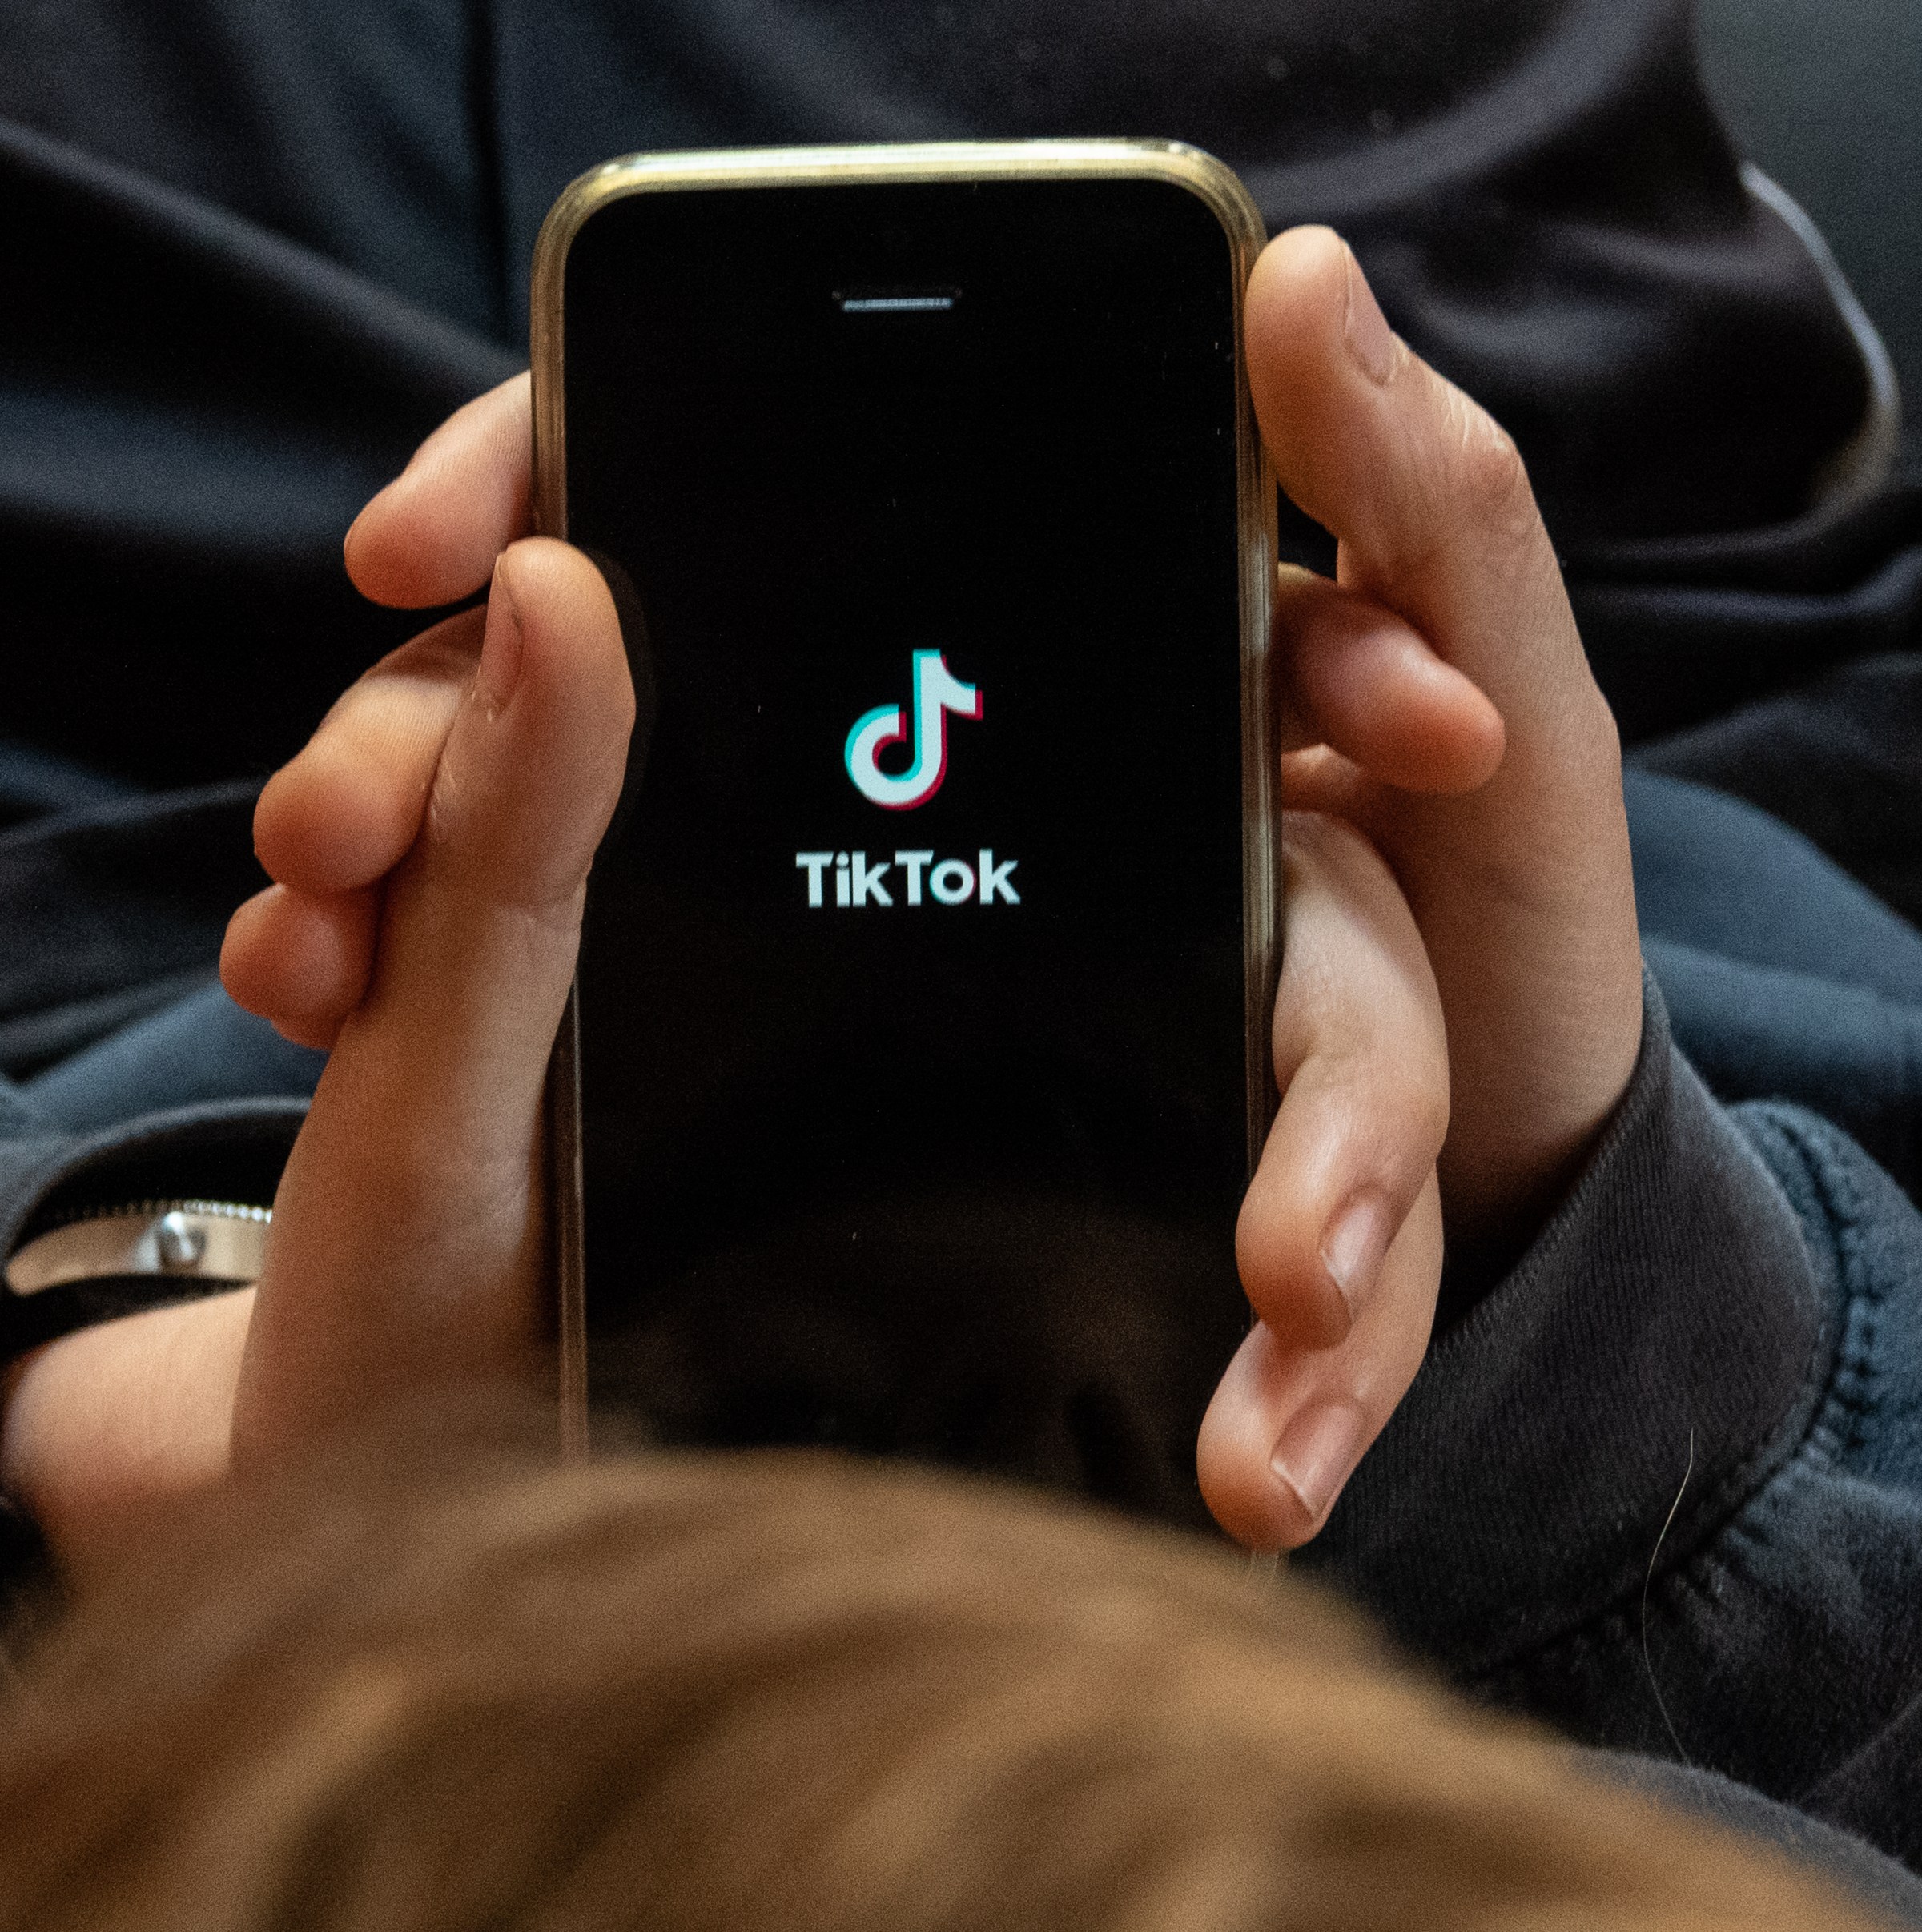 Is the new TikTok ban for real?